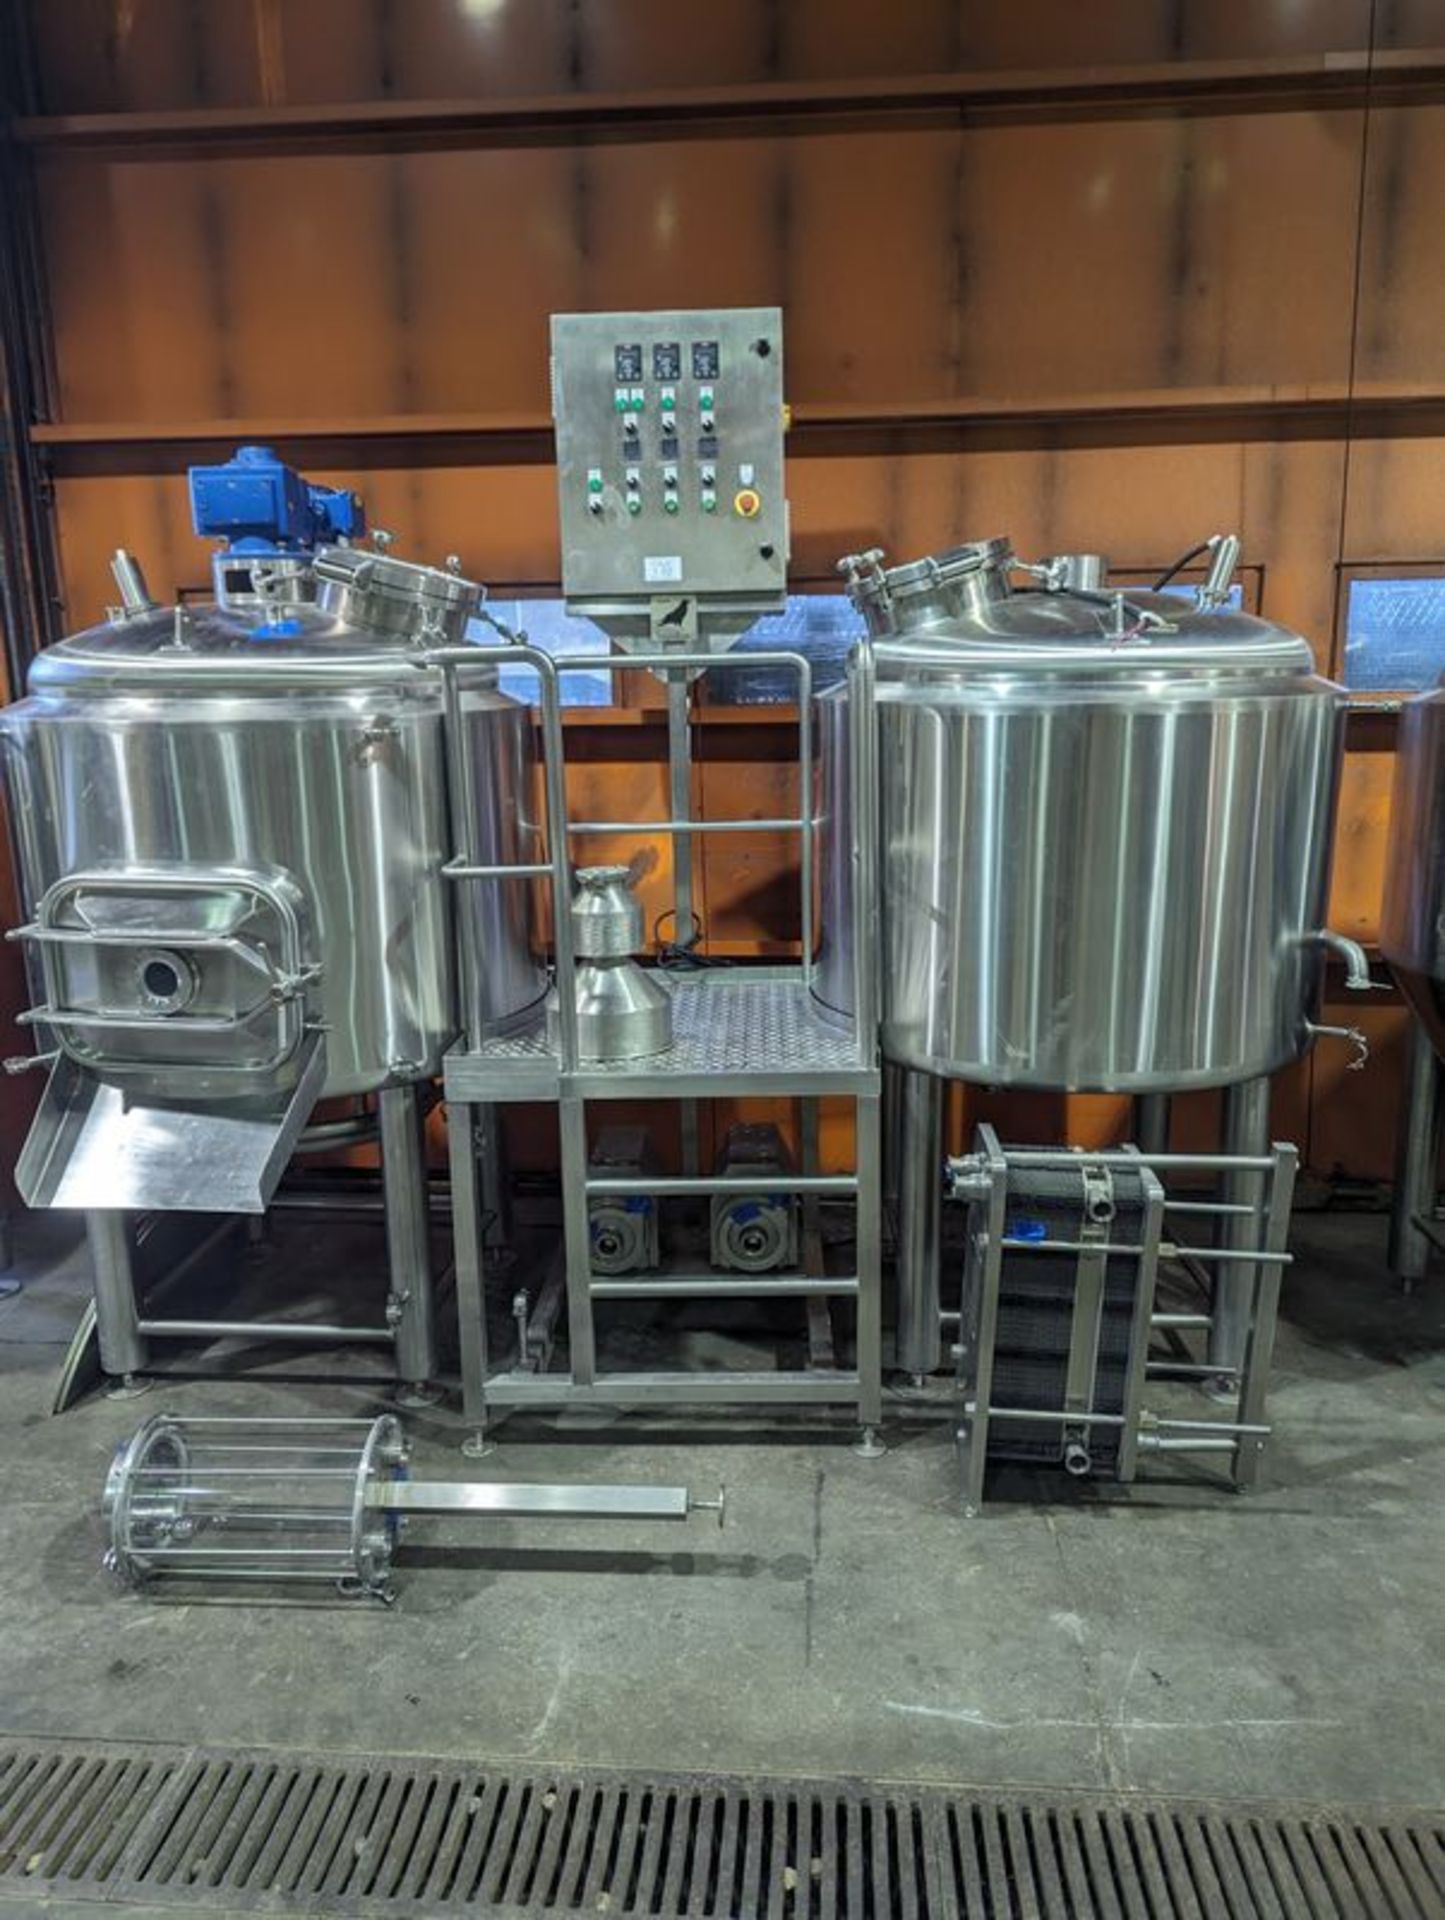 NRM 5 BBL Brewhouse. Original Cost $59,000.00. New in 2022.